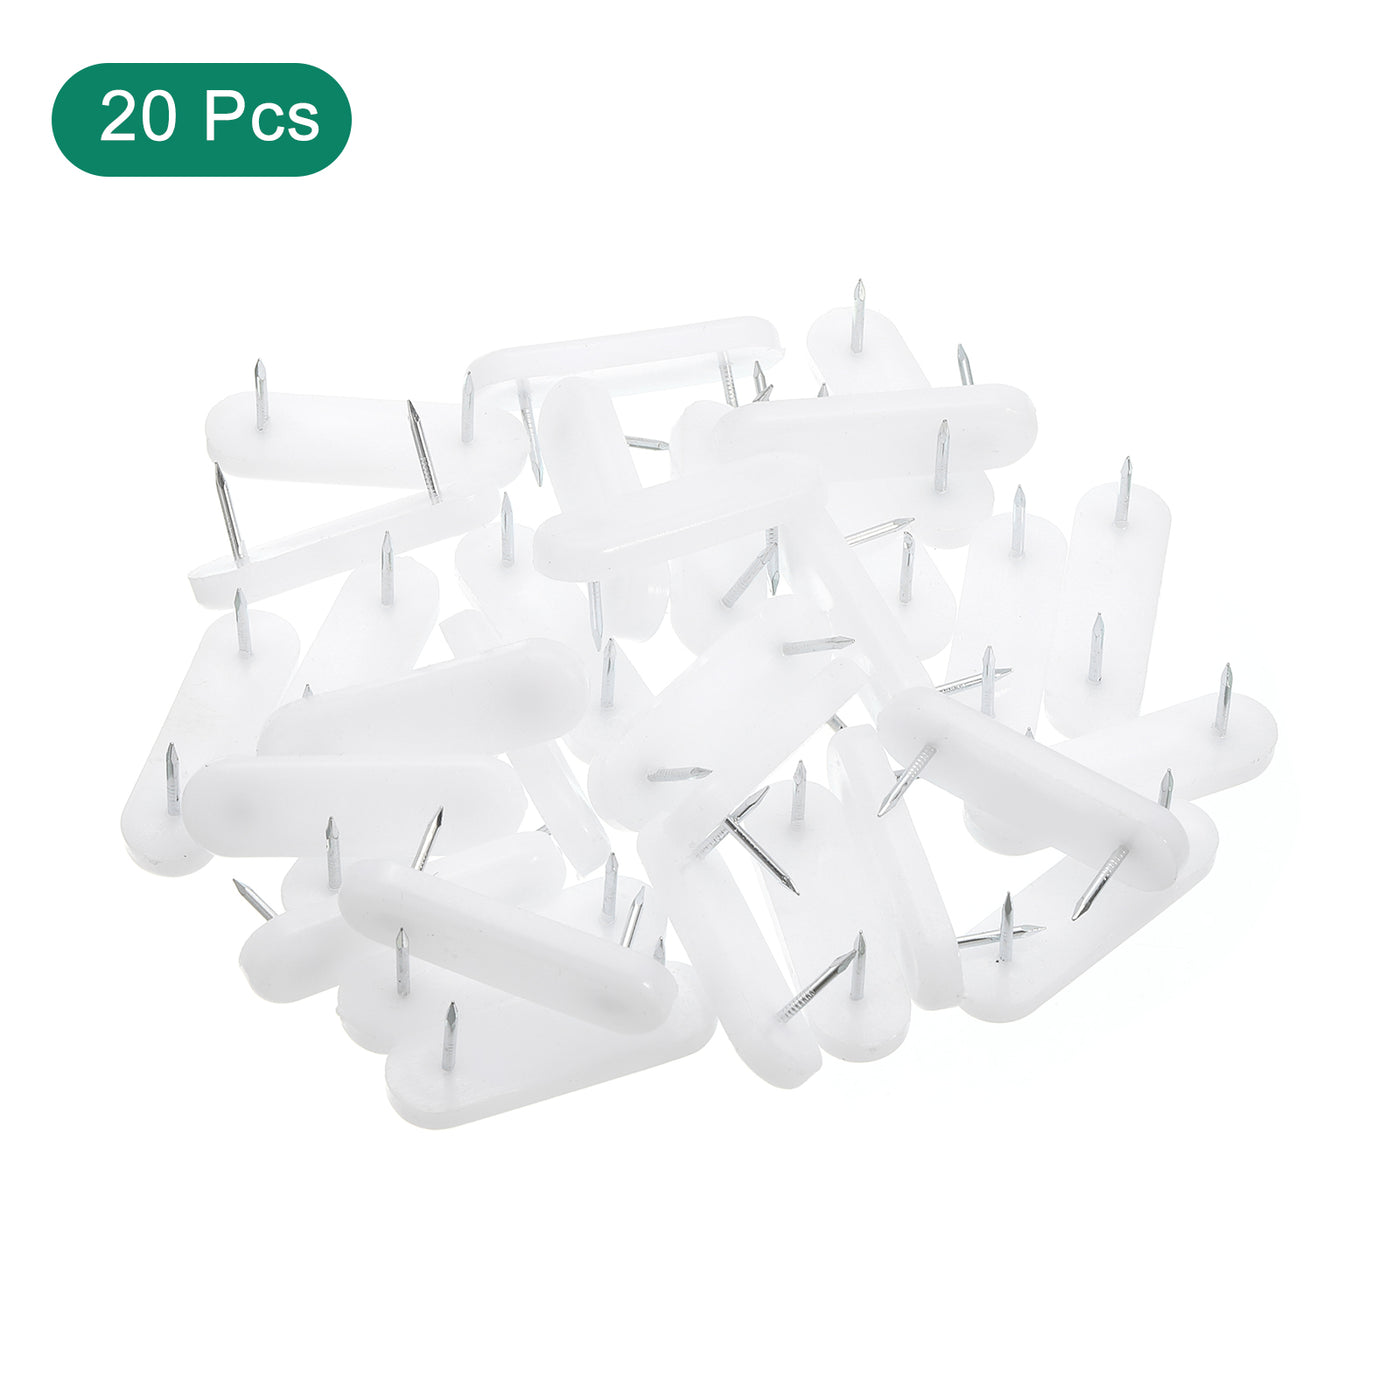 uxcell Uxcell Nail on Furniture Glides, 20pcs Plastic Double Pins Furniture Sliders